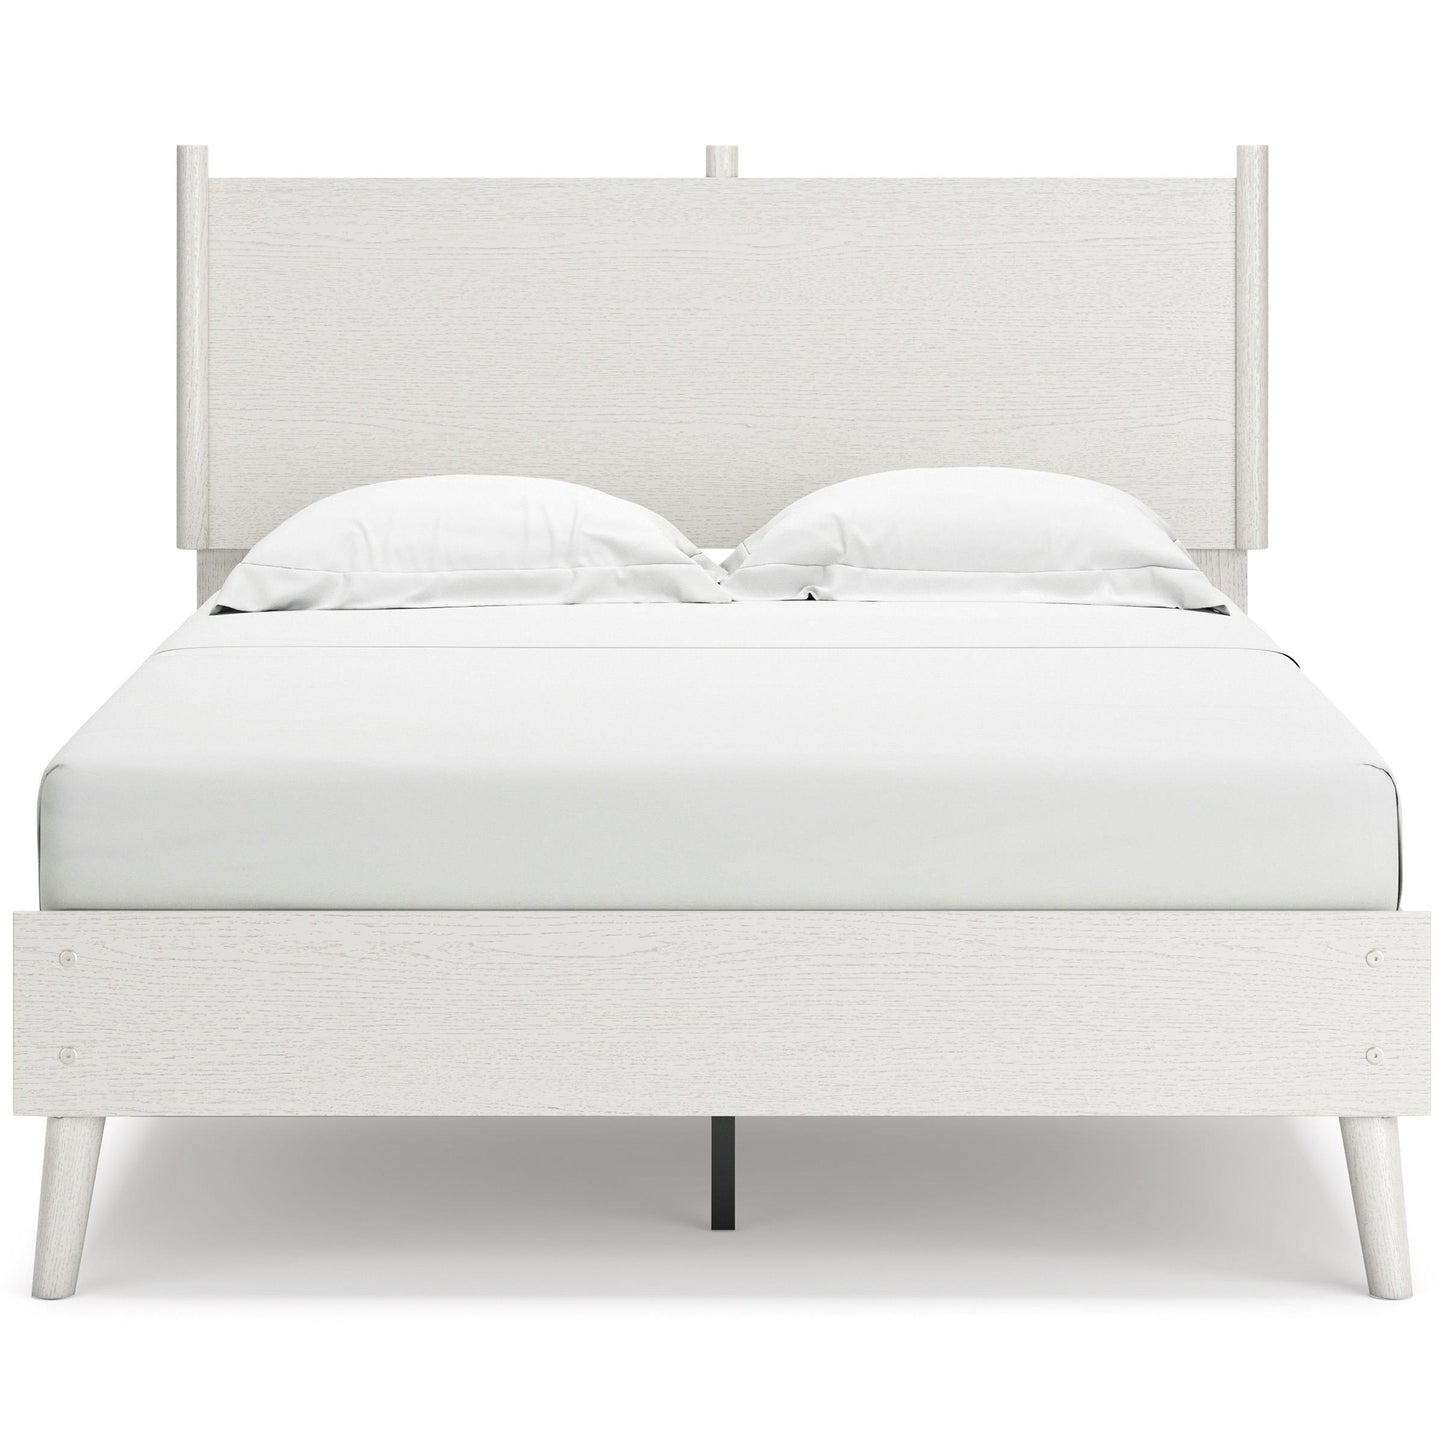 Signature Design by Ashley Kids Beds Bed EB1024-112/EB1024-156 IMAGE 2